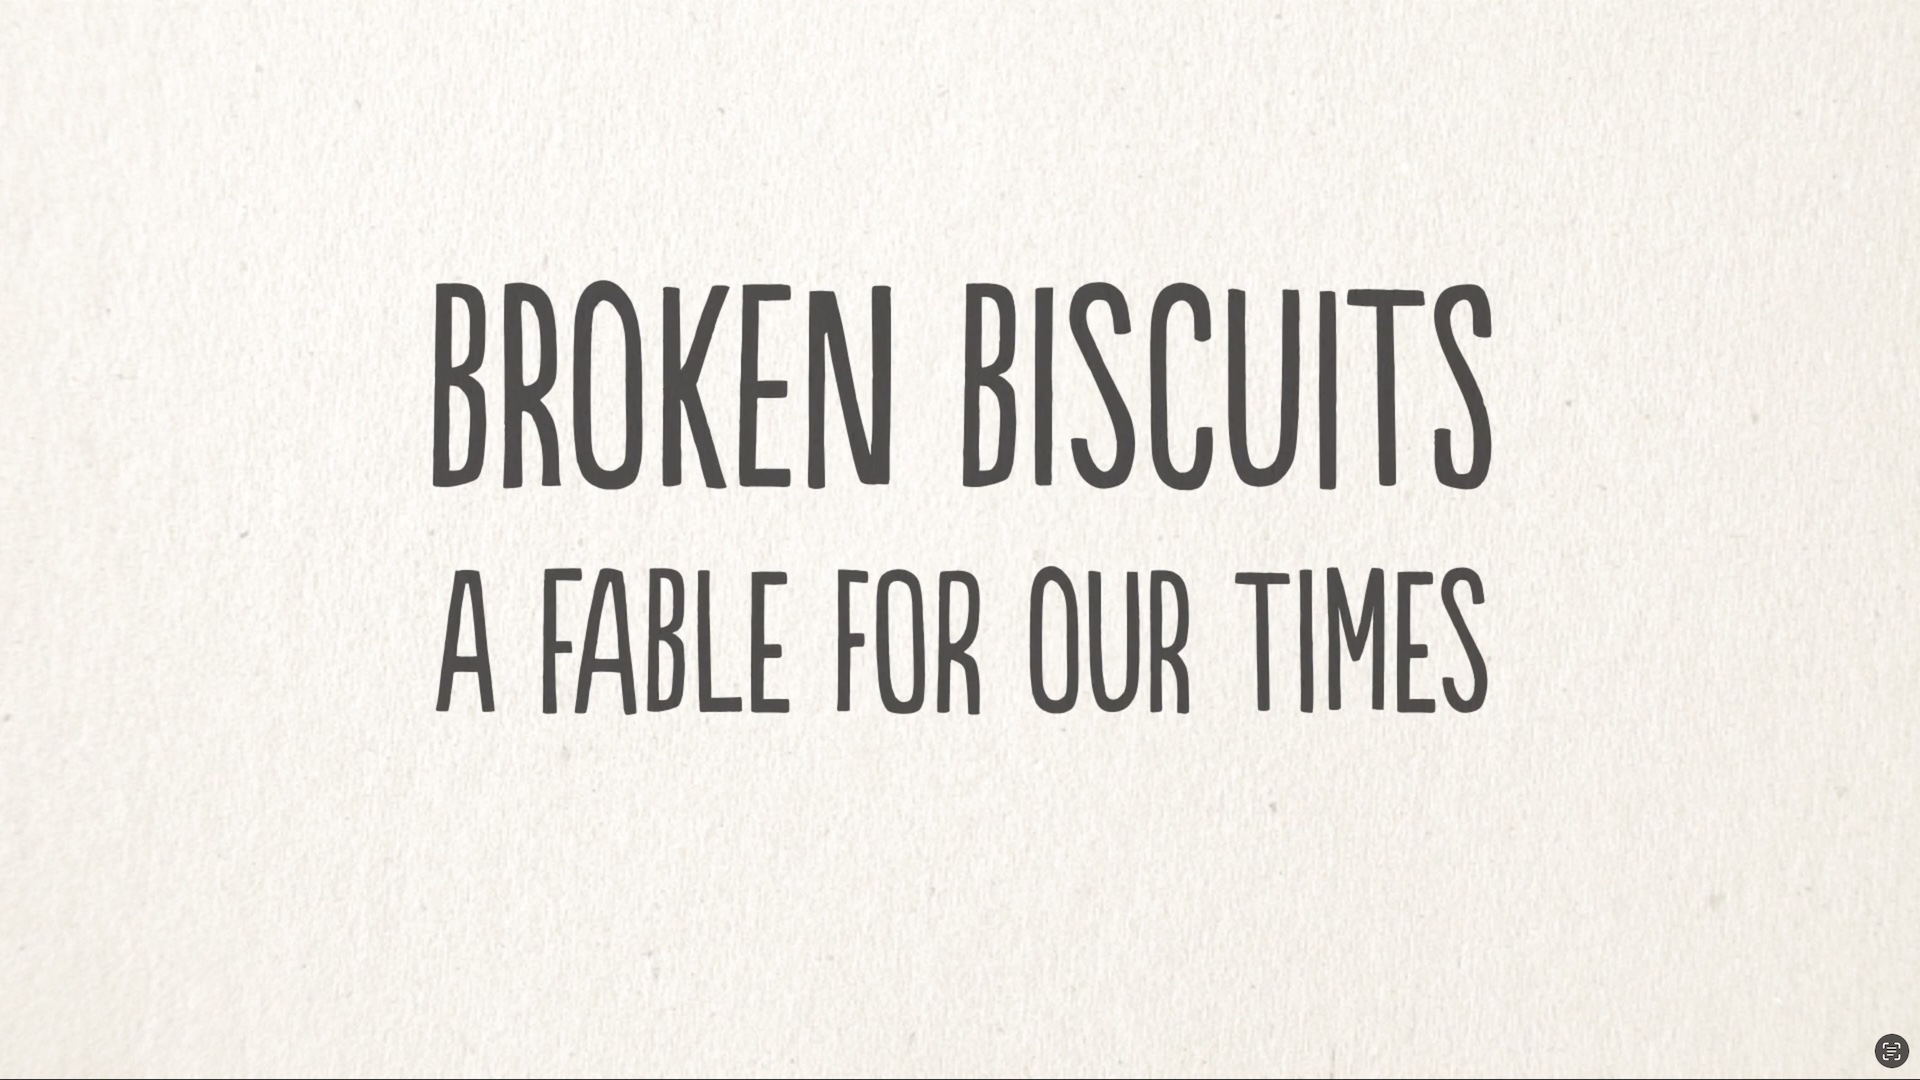 Broken Biscuits a fable for our times